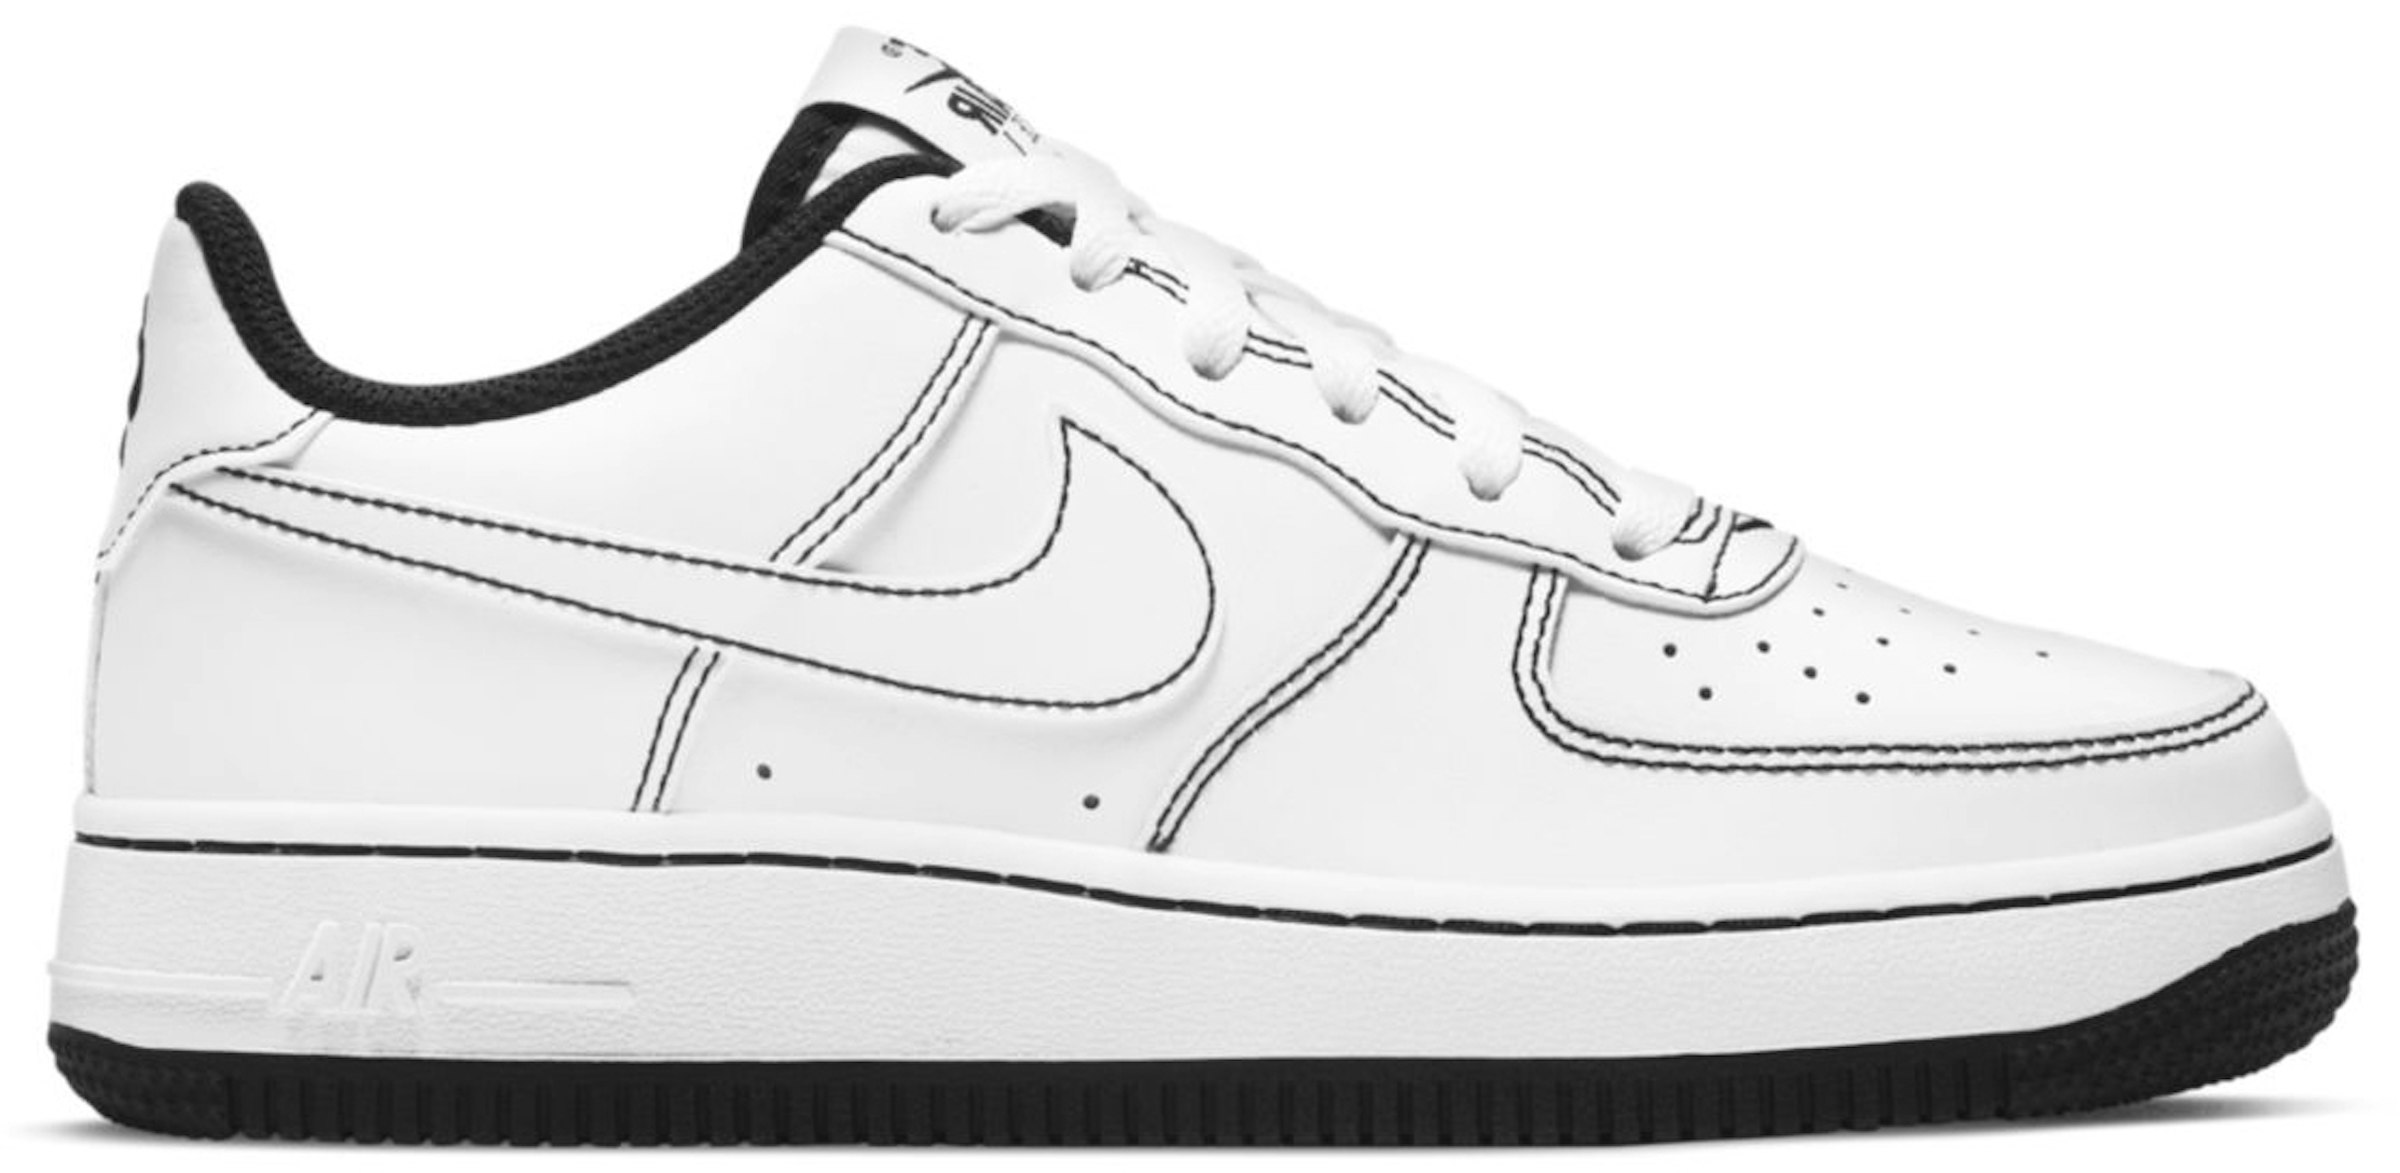 Roux coupon Kort leven Nike Air Force 1 Low 07 Contrast Stitch White Black (GS) Kids' - CW1575-104  - US